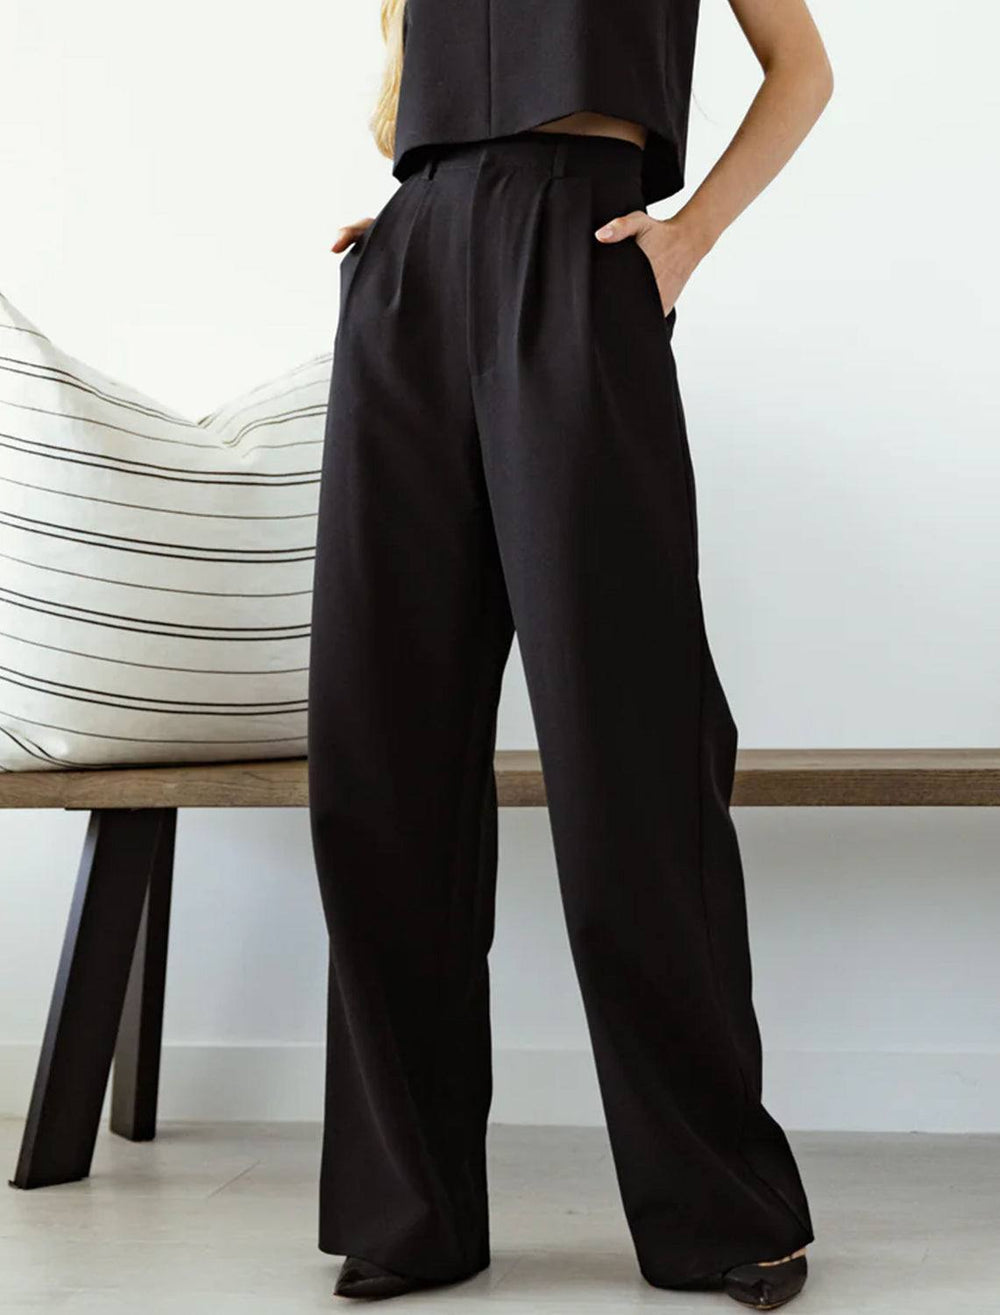 Model wearing Sundays NYC's gentry trousers in black.